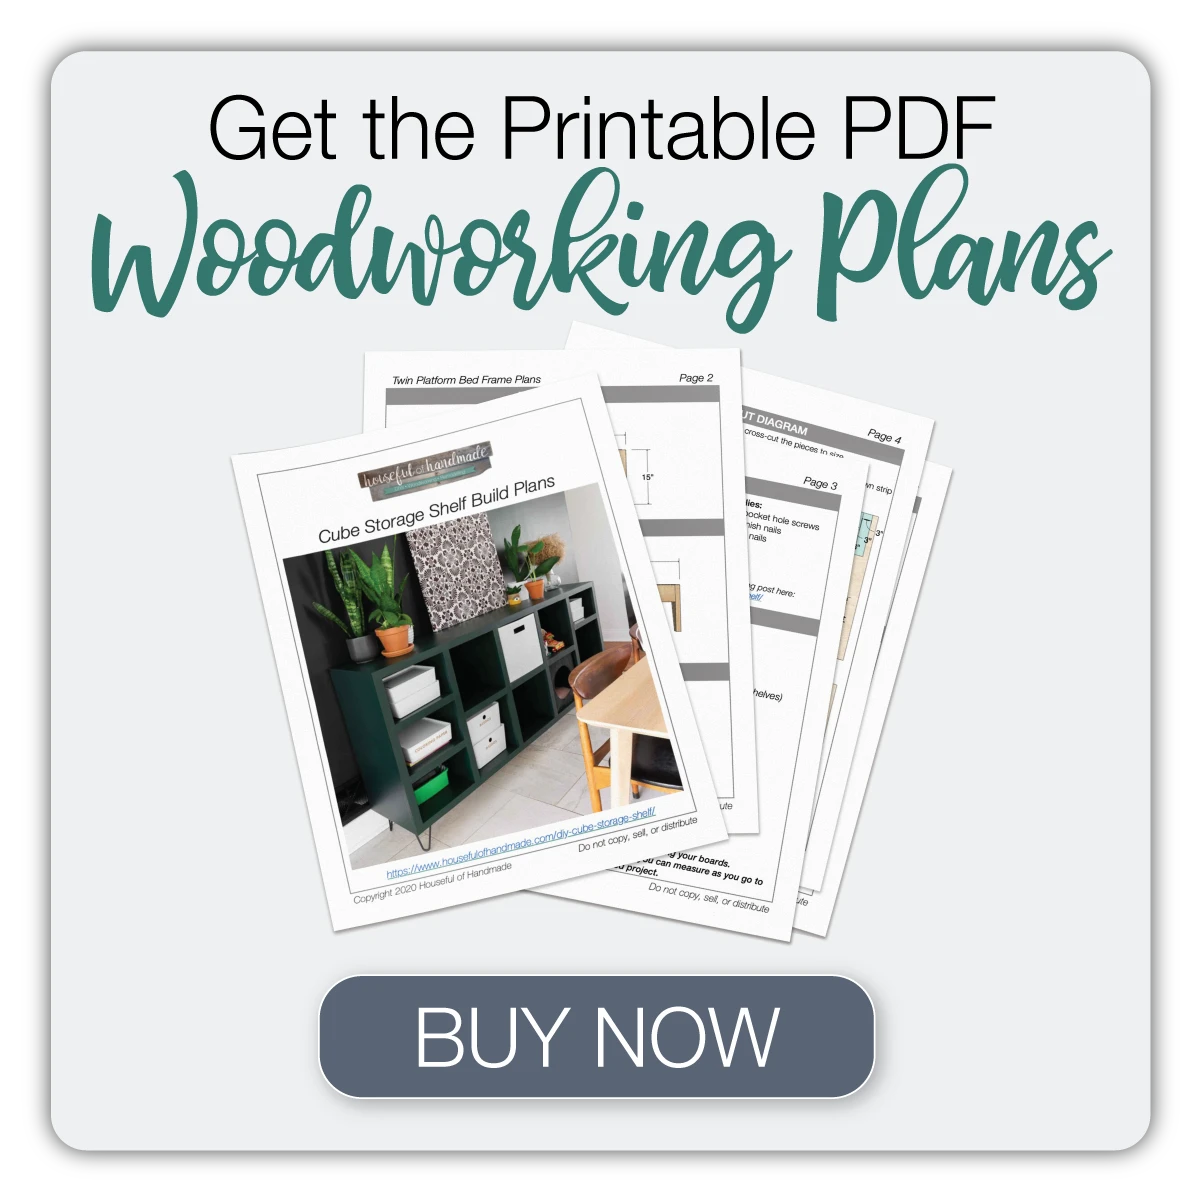 Button to buy the printable PDF woodworking plans for the cube storage shelf build.